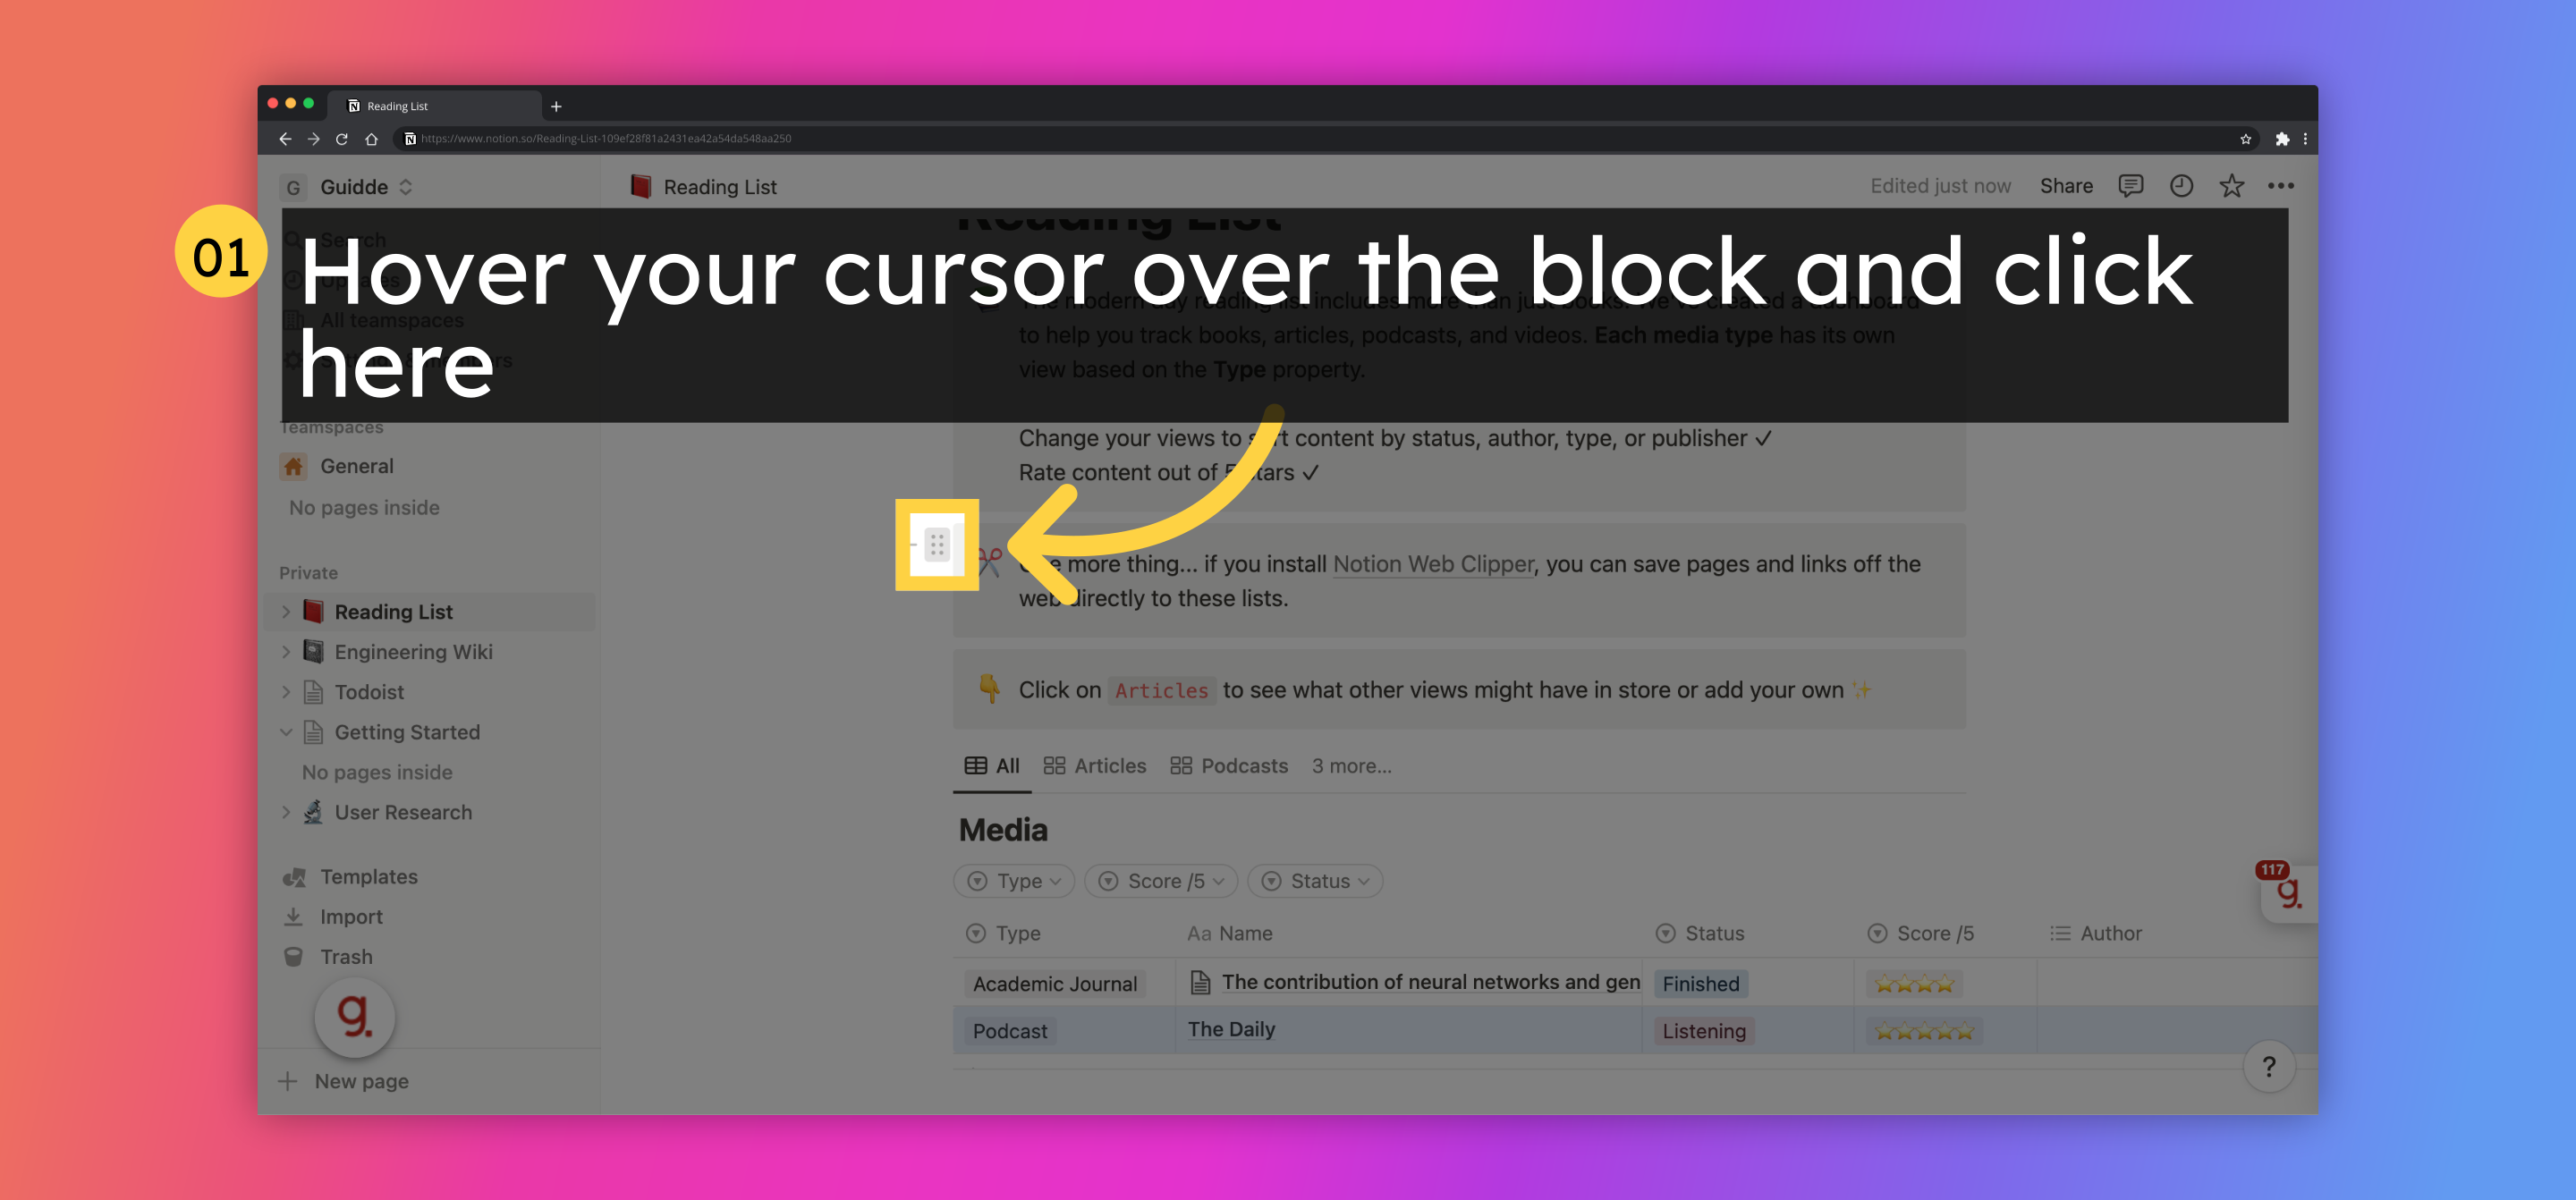 Hover your cursor over the block and click here